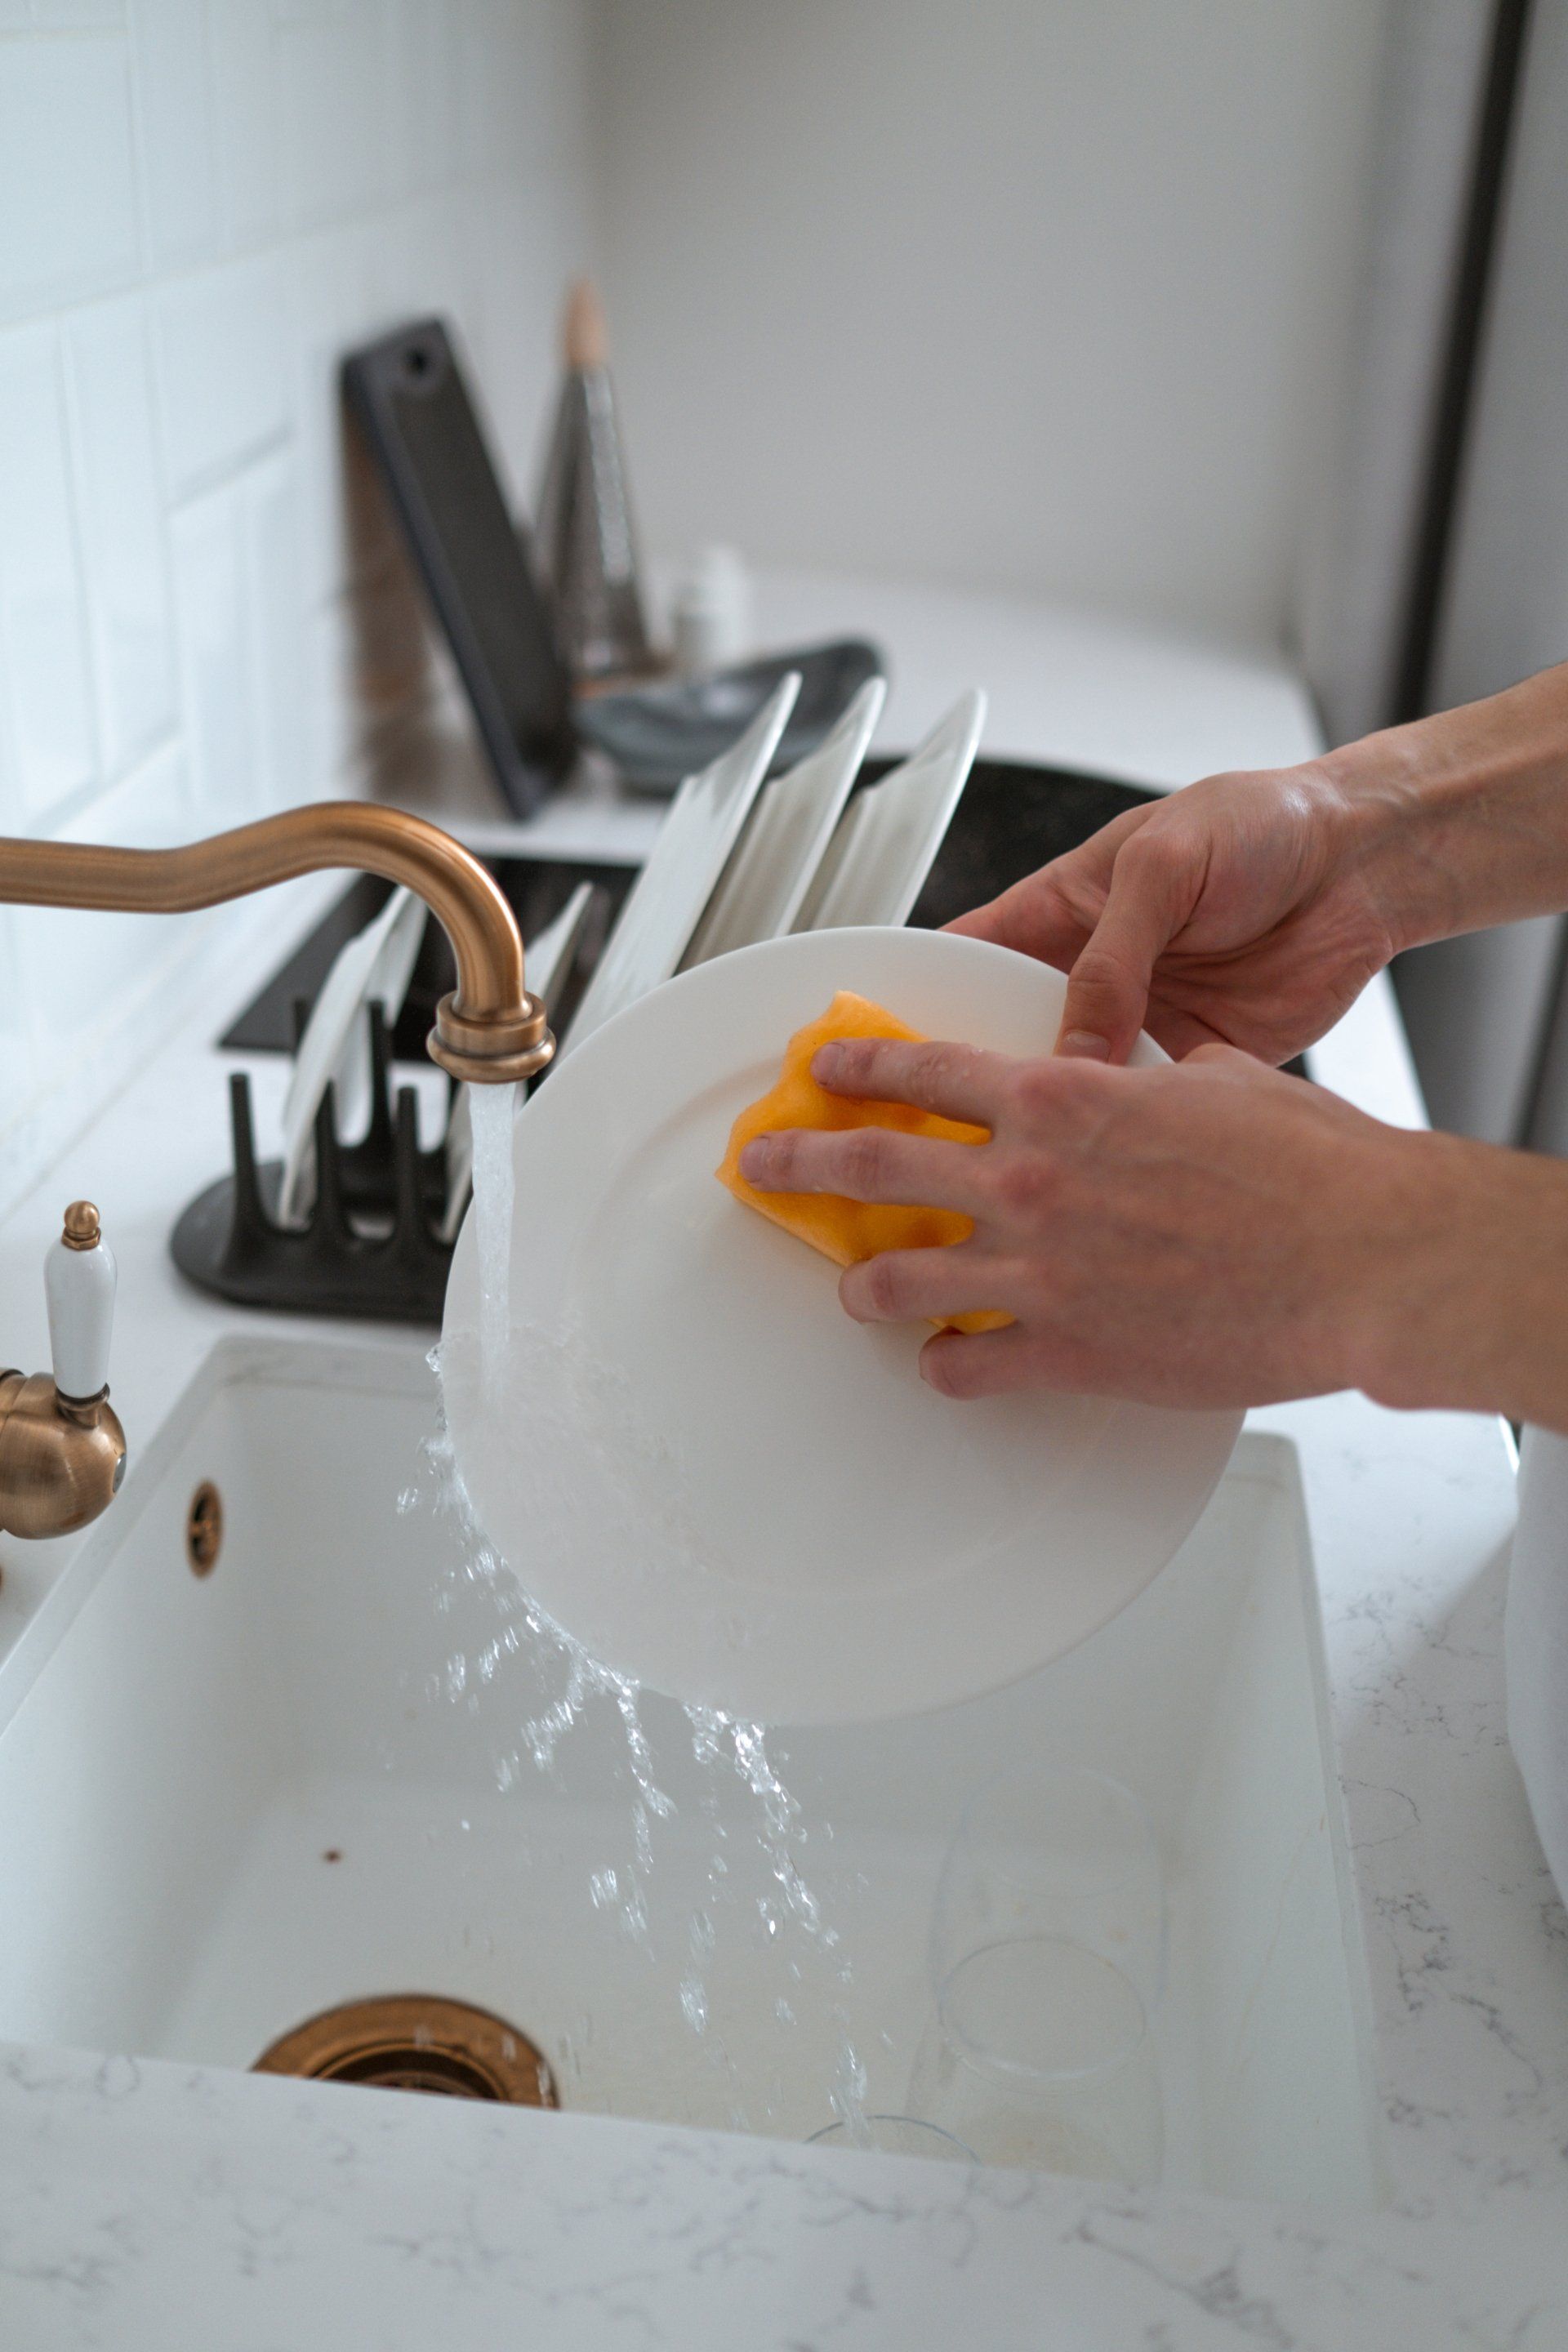 The Dos and Don’ts of Kitchen Sink Maintenance